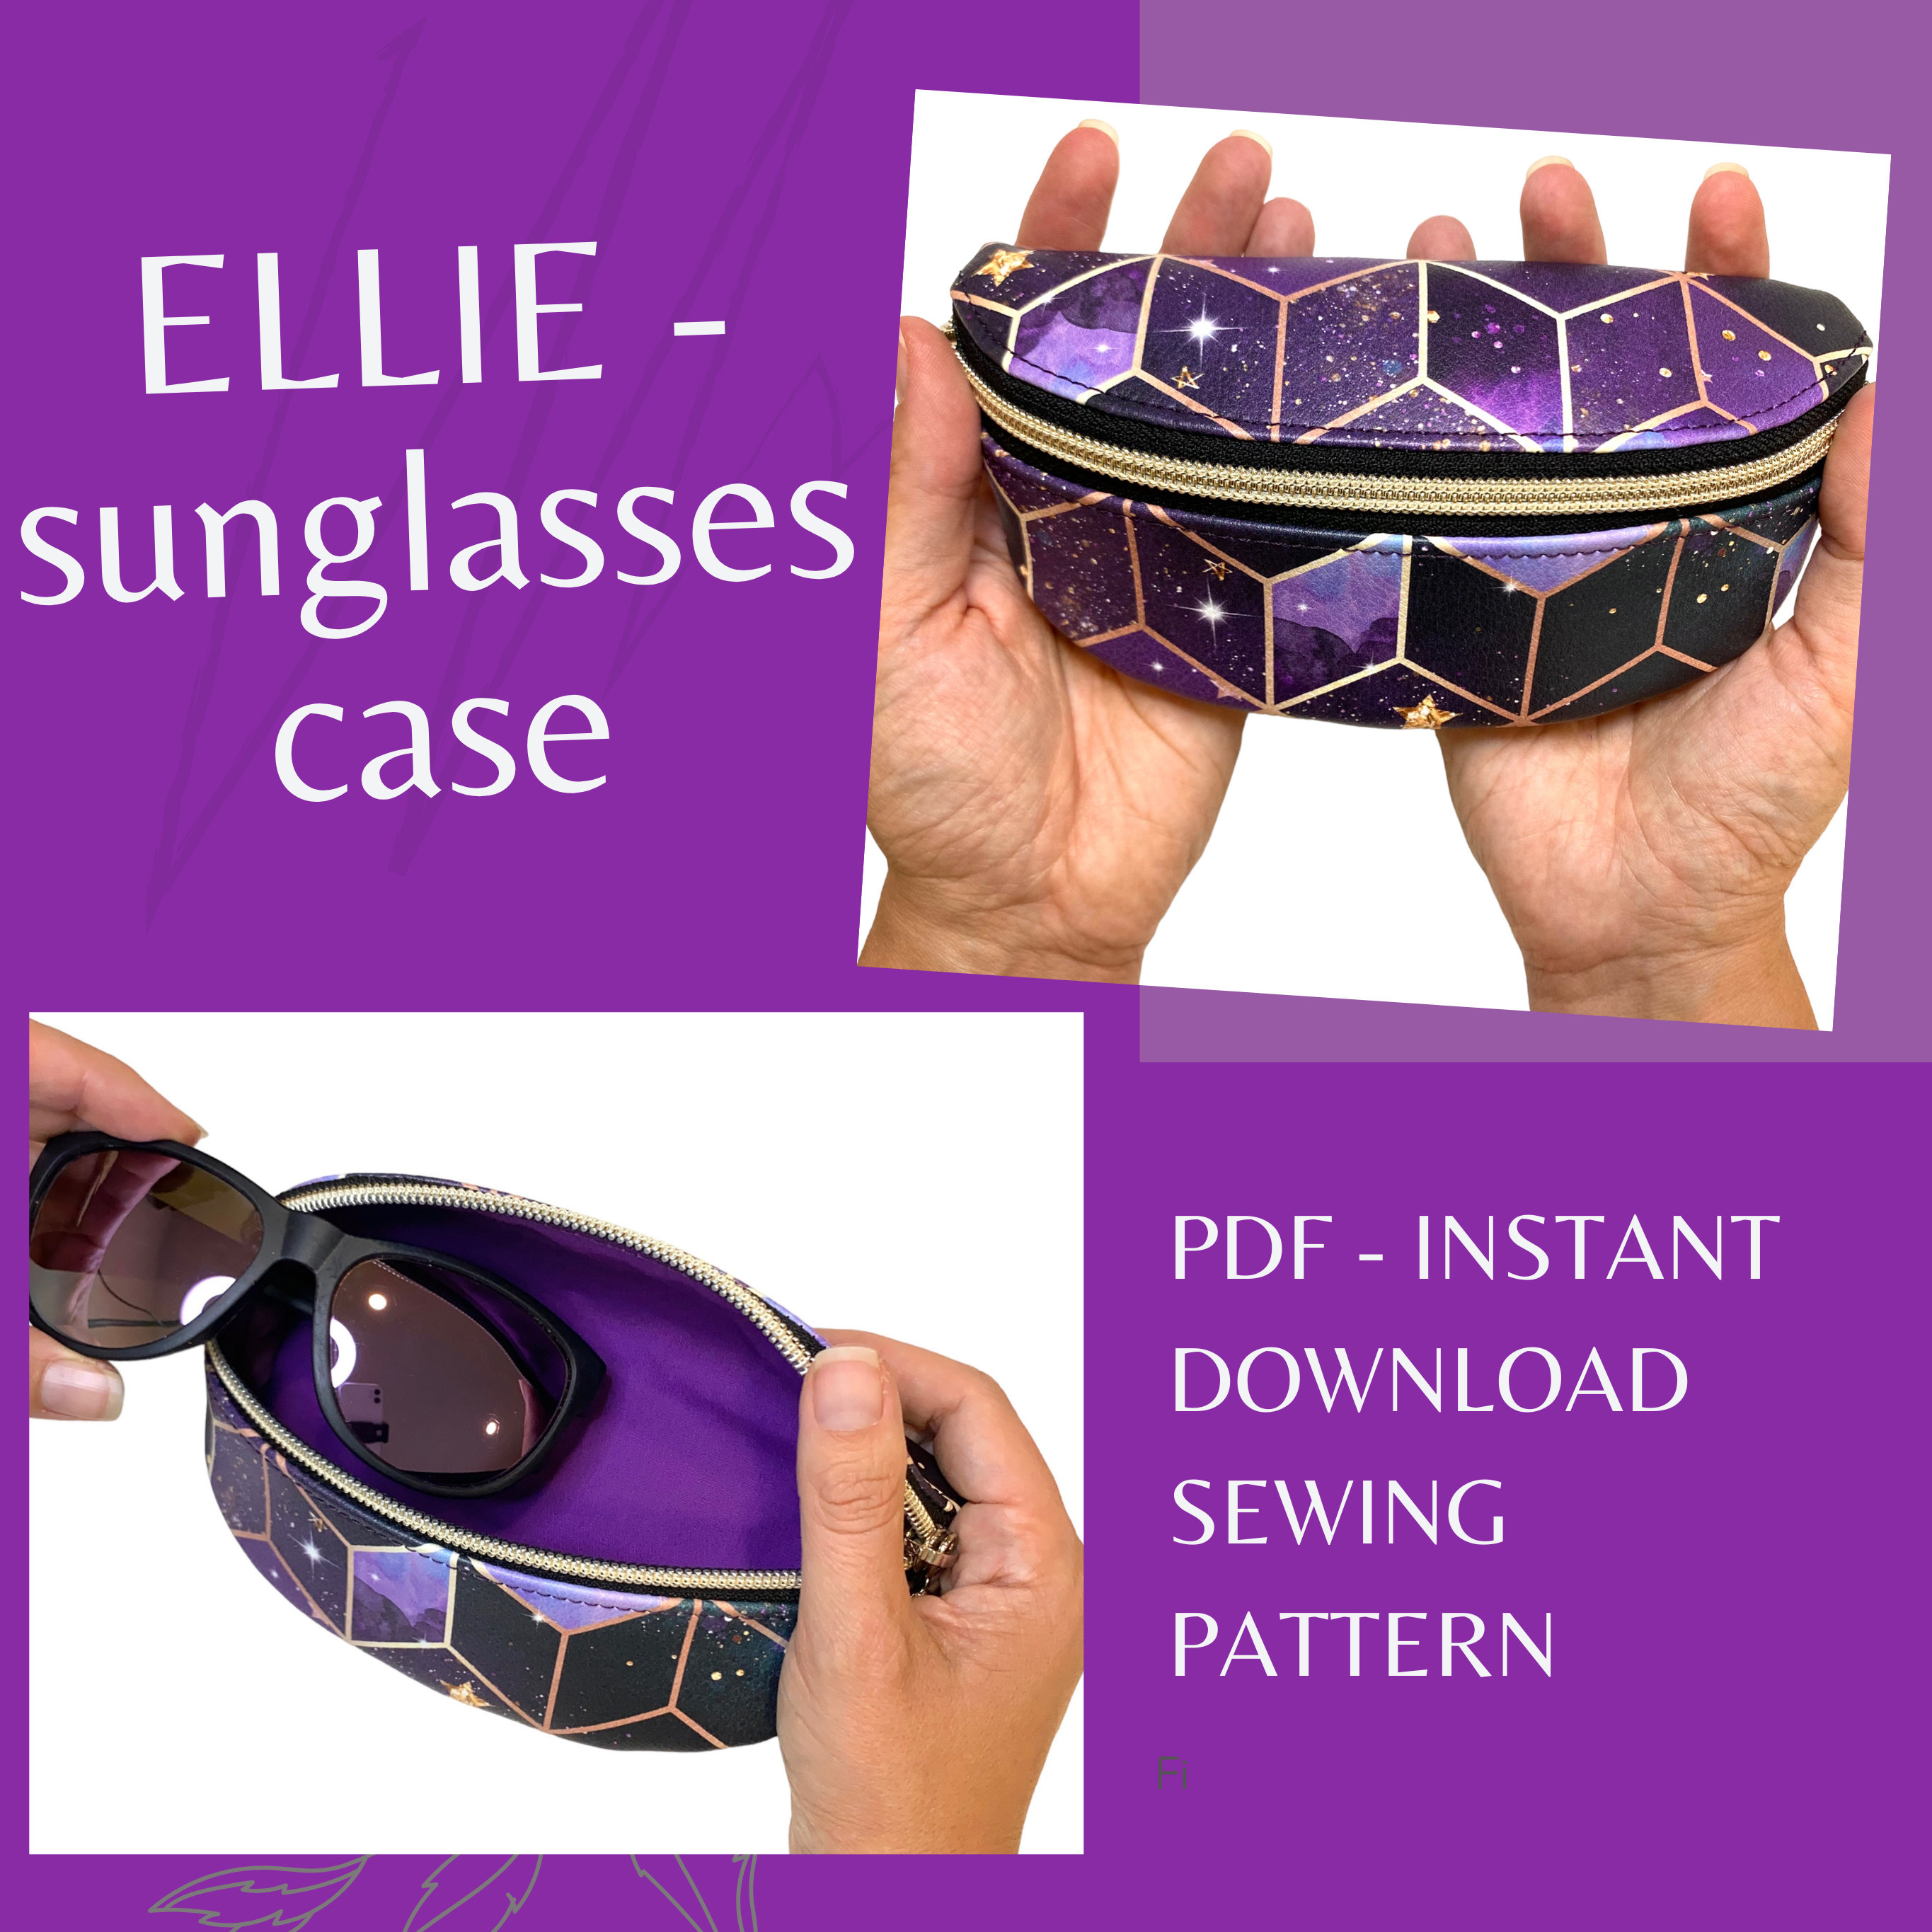 Small Clam Case - Compact Eyewear Protection